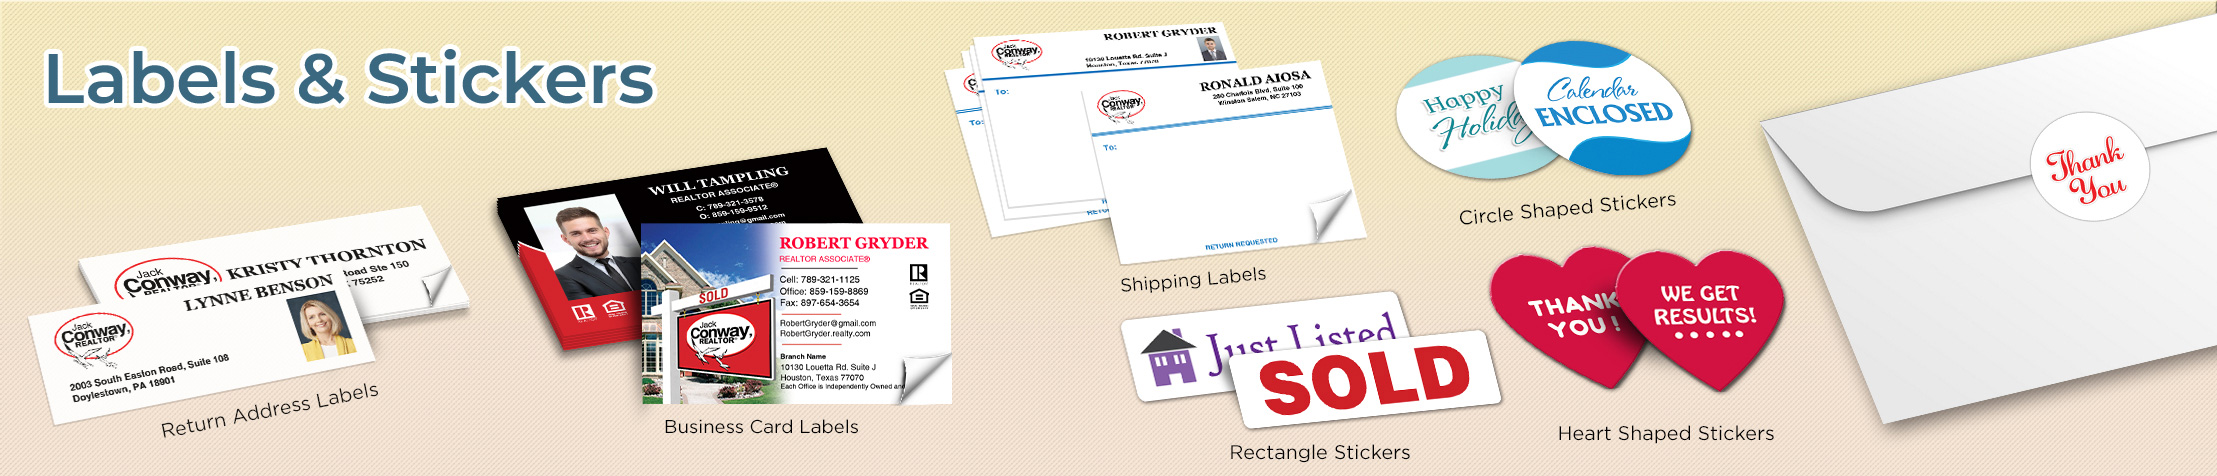 Jack Conway Realtor Real Estate Labels and Stickers - Jack Conway Realtor  business card labels, return address labels, shipping labels, and assorted stickers | BestPrintBuy.com